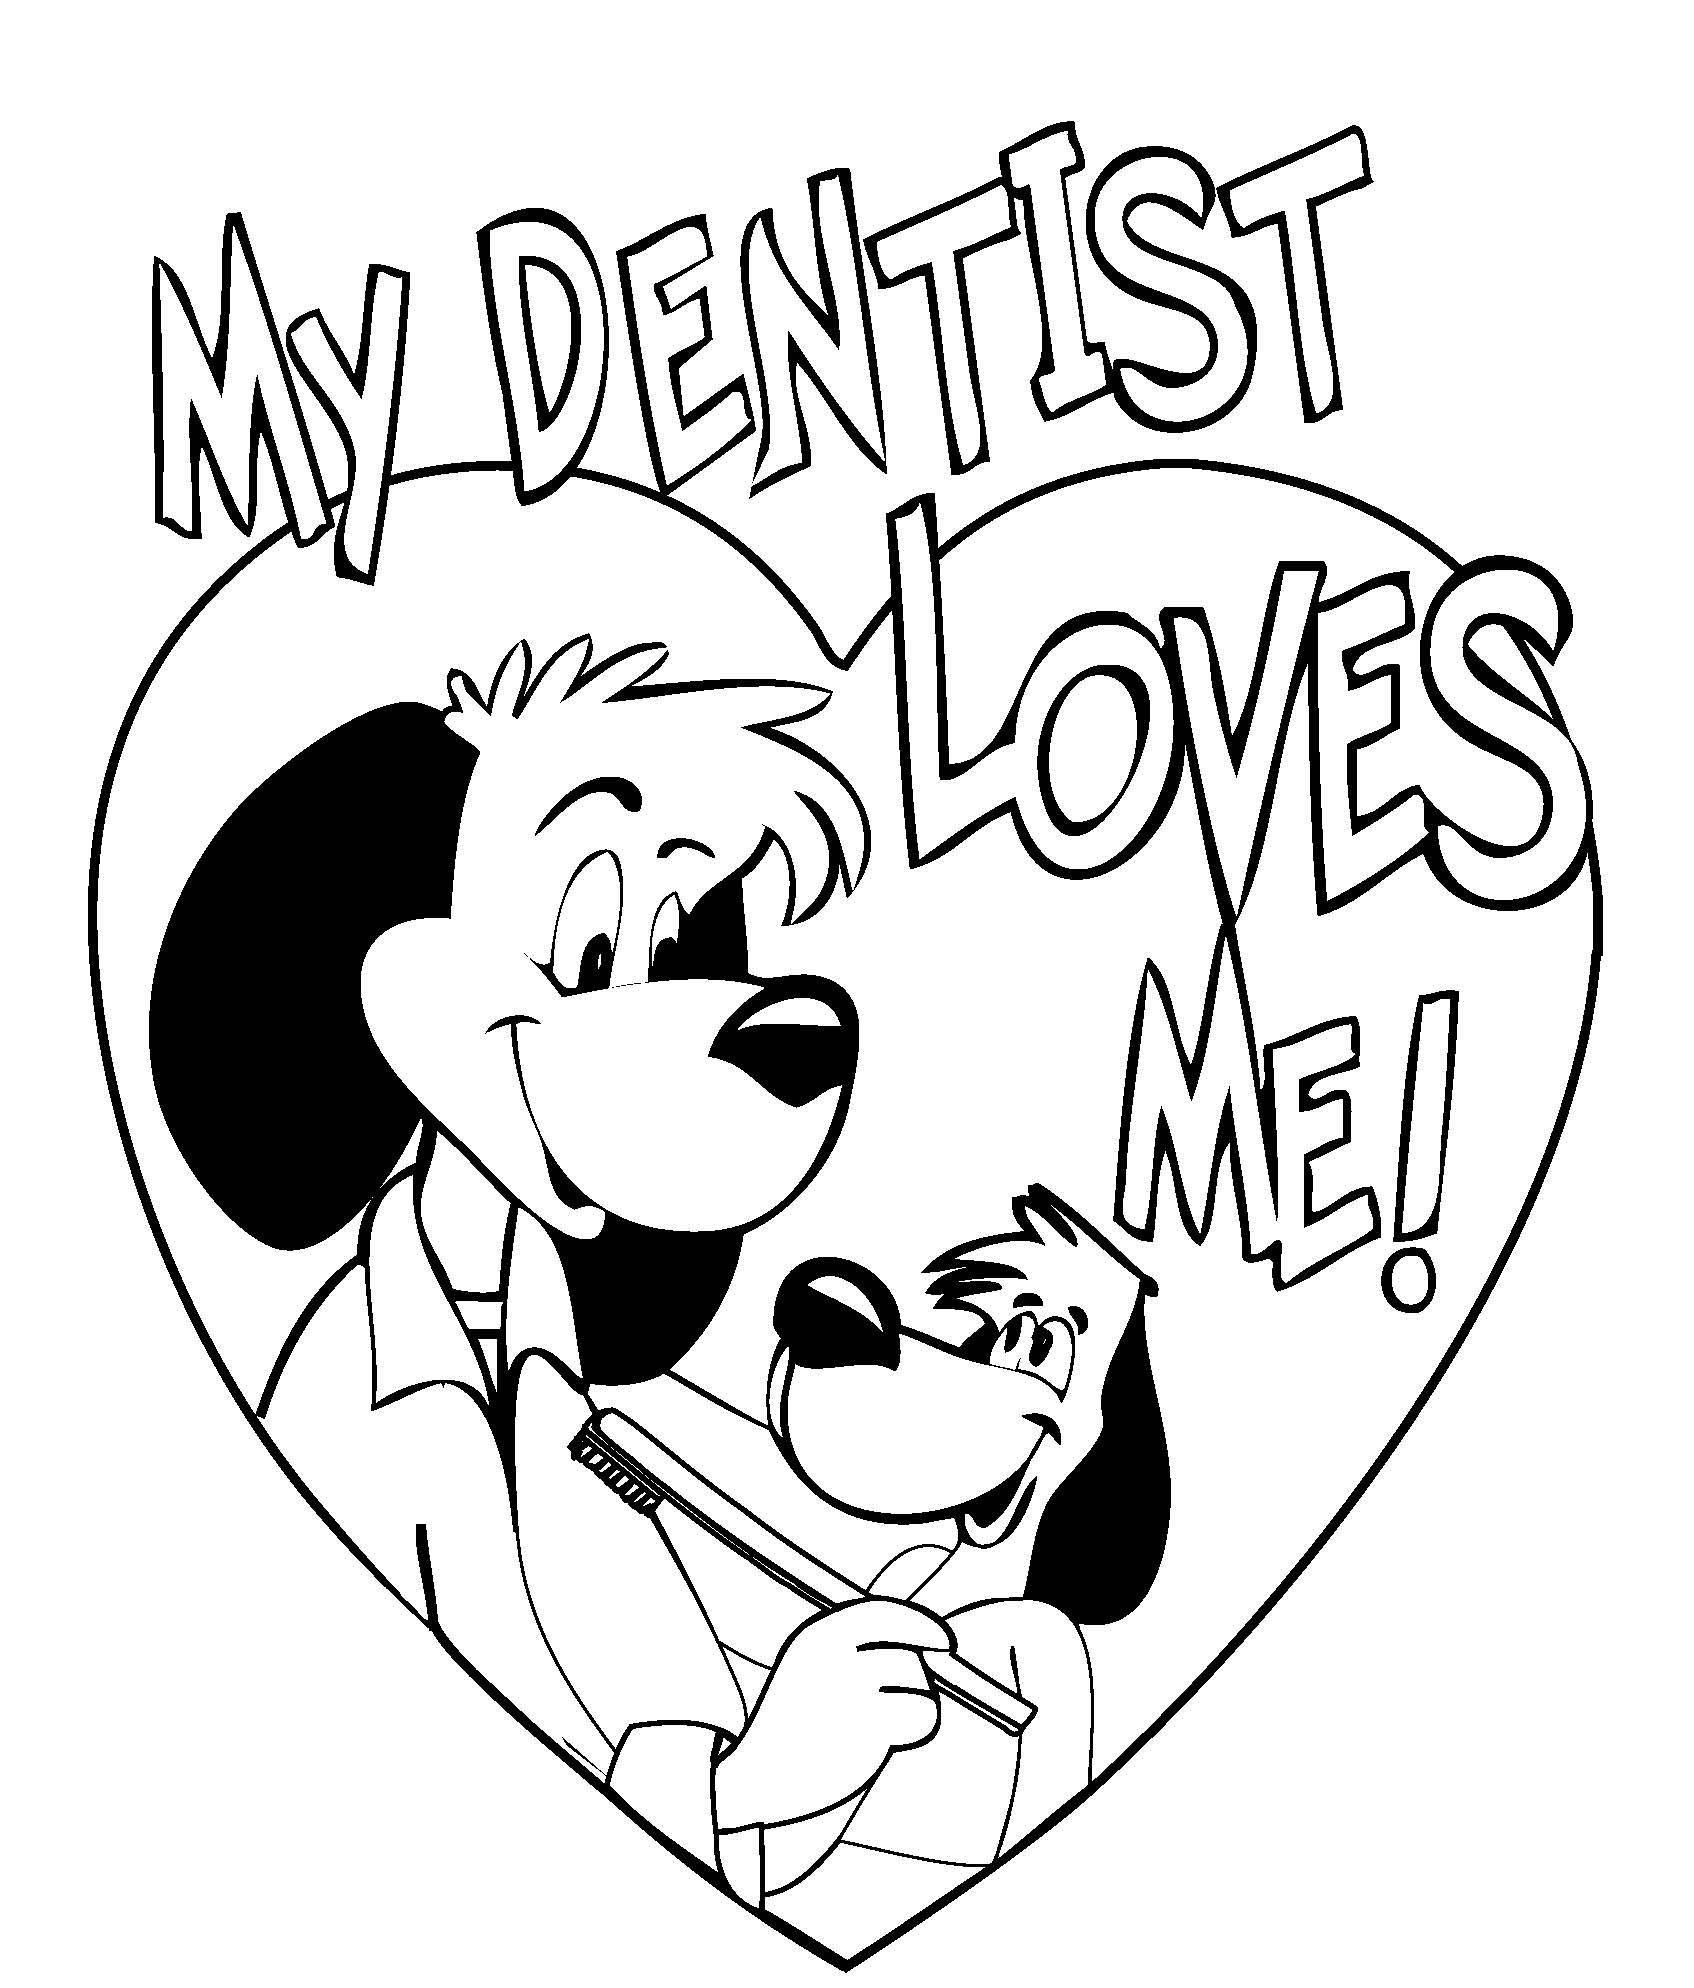 My Dentist Loves Me Coloring Page